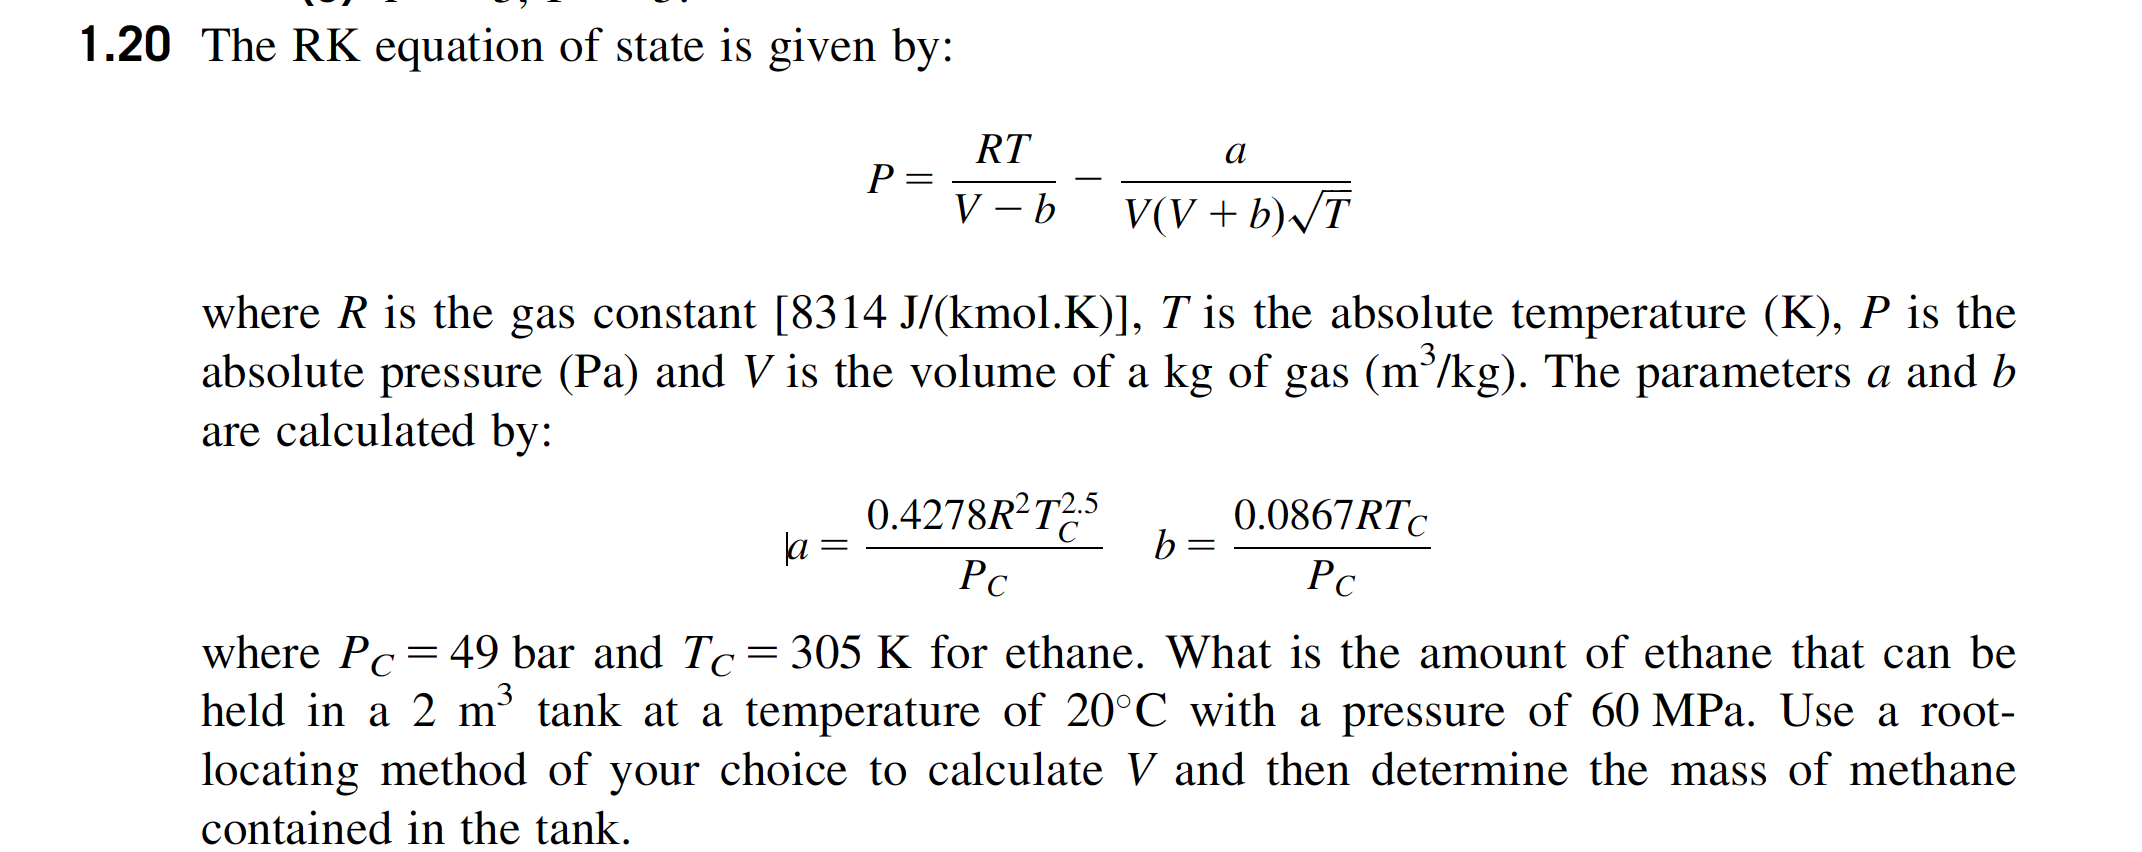 Solved 1.20 The RK equation of state is given by: | Chegg.com